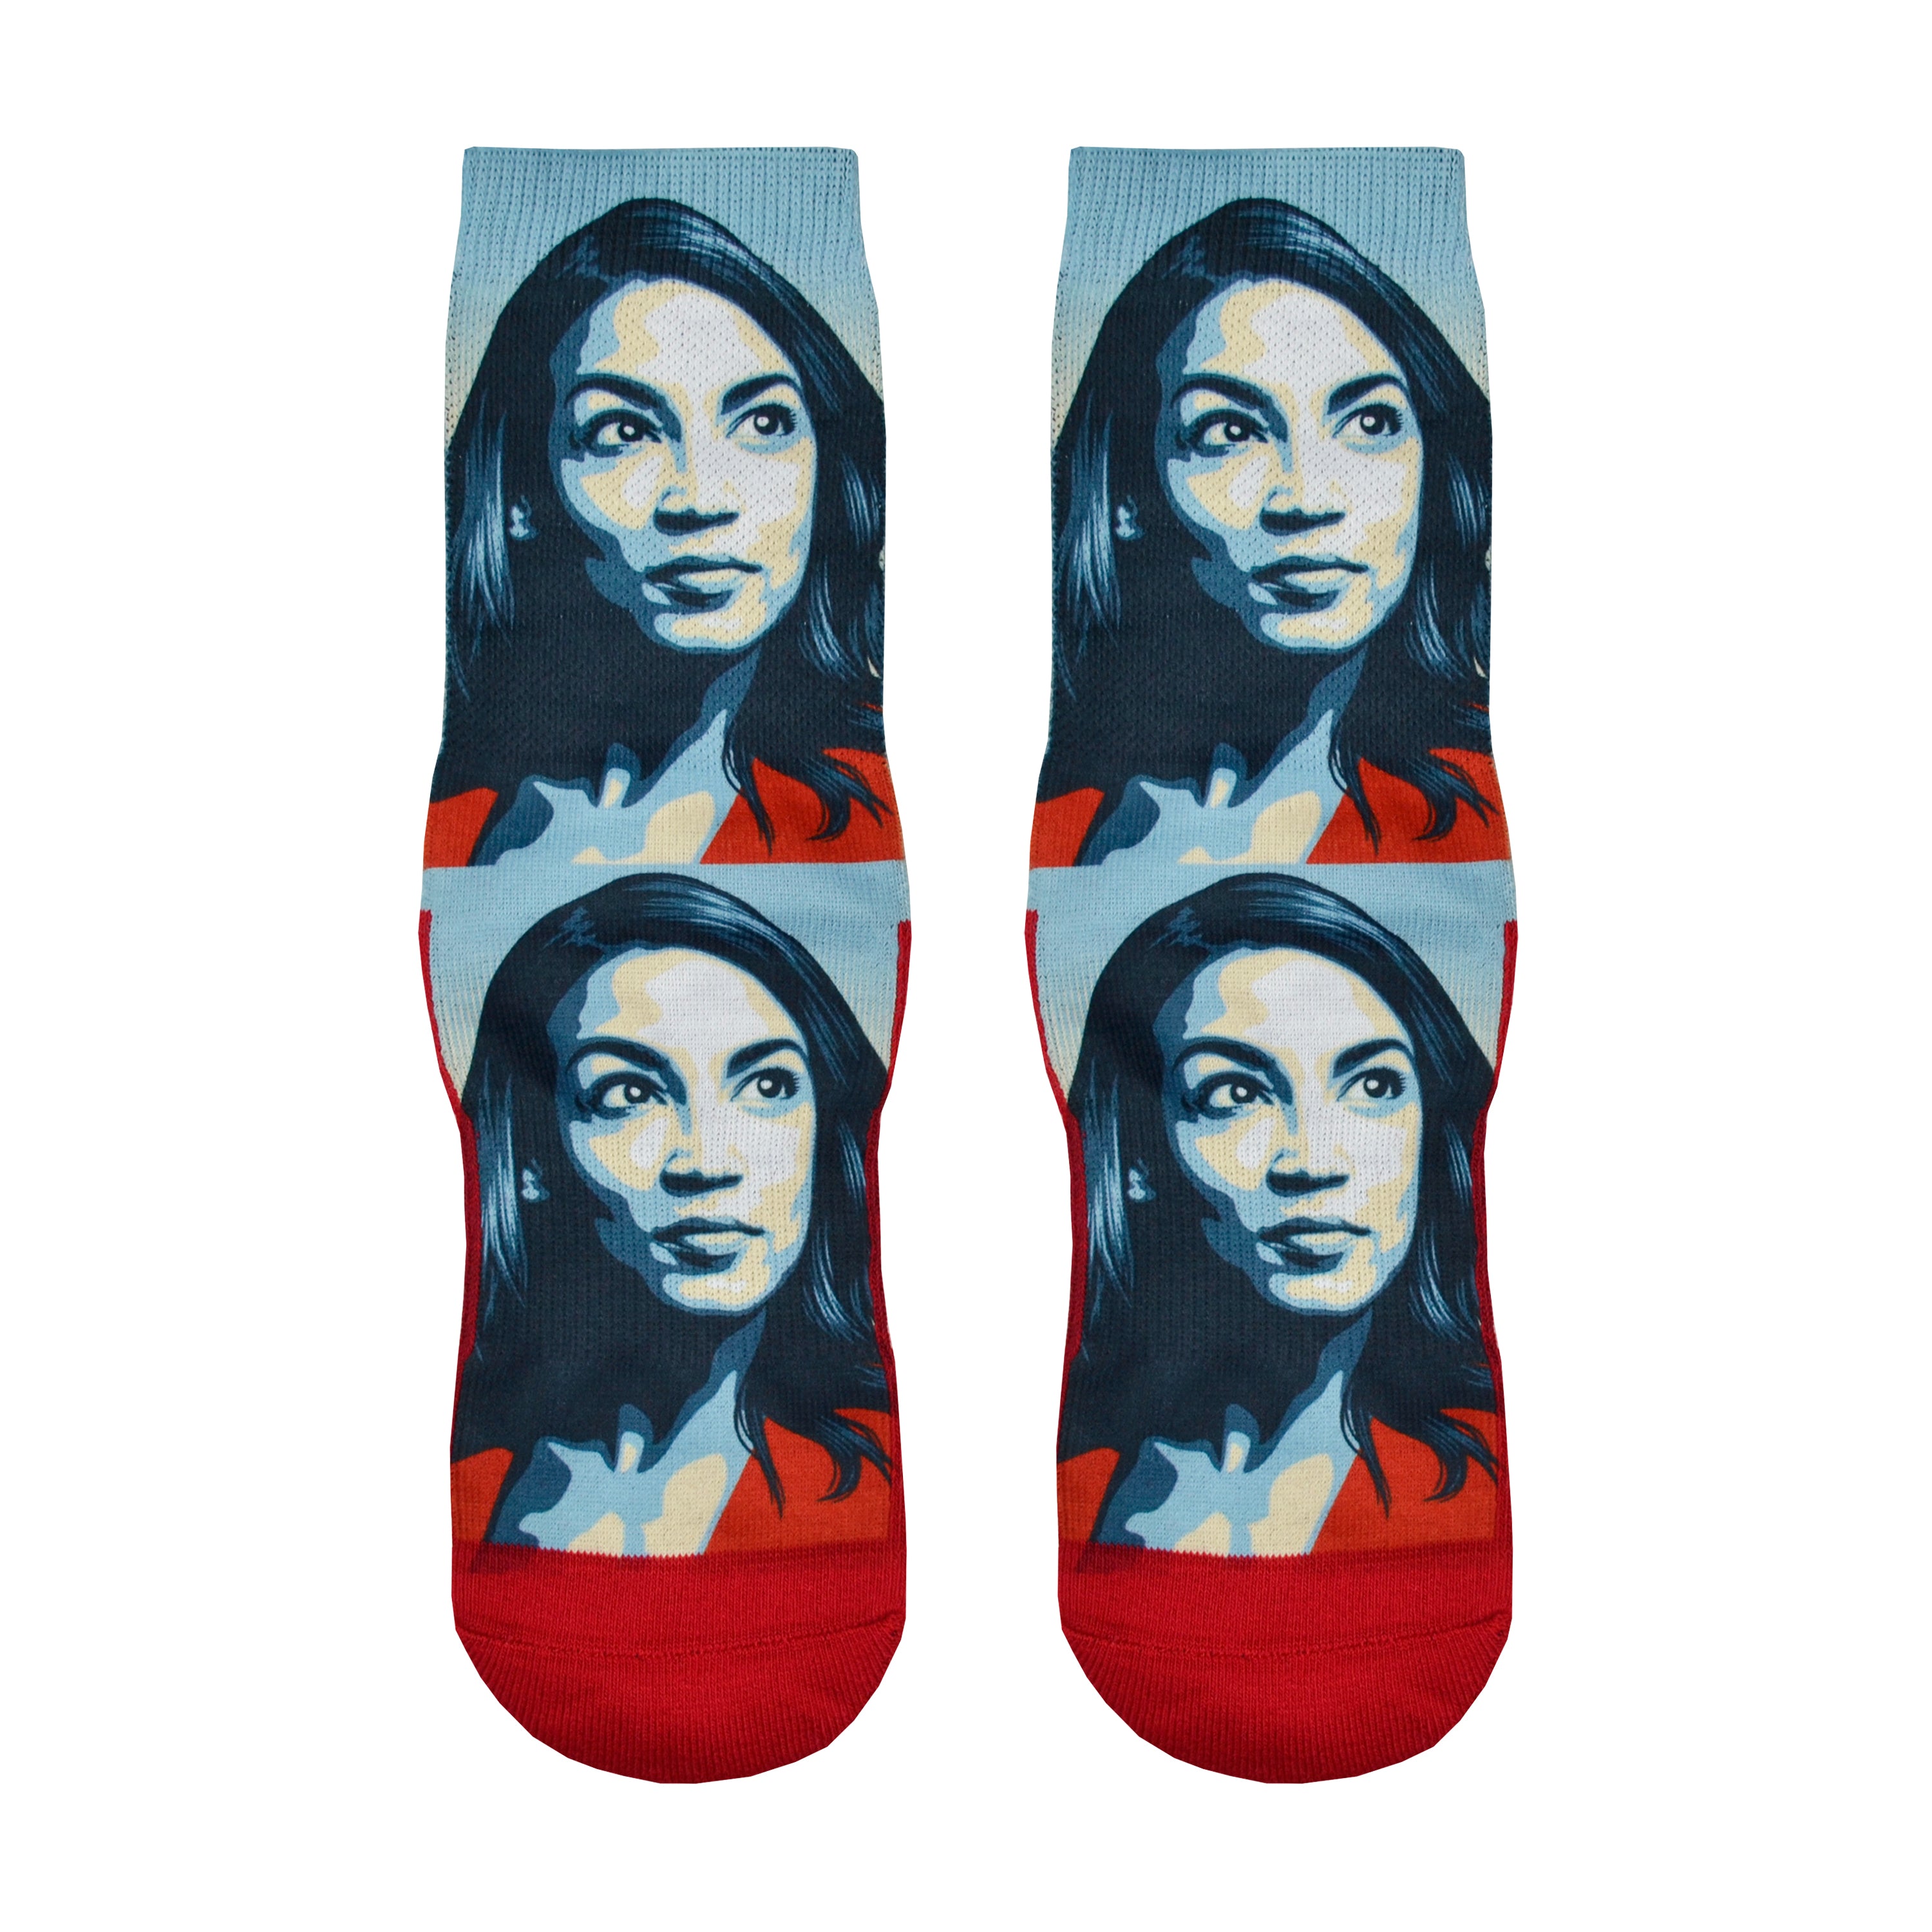 Shown in a flatlay, a pair of Good Luck Socks’ polyester-cotton women’s crew socks with portrait of Alexandria Ocasio-Cortez in shades of red, white and blue